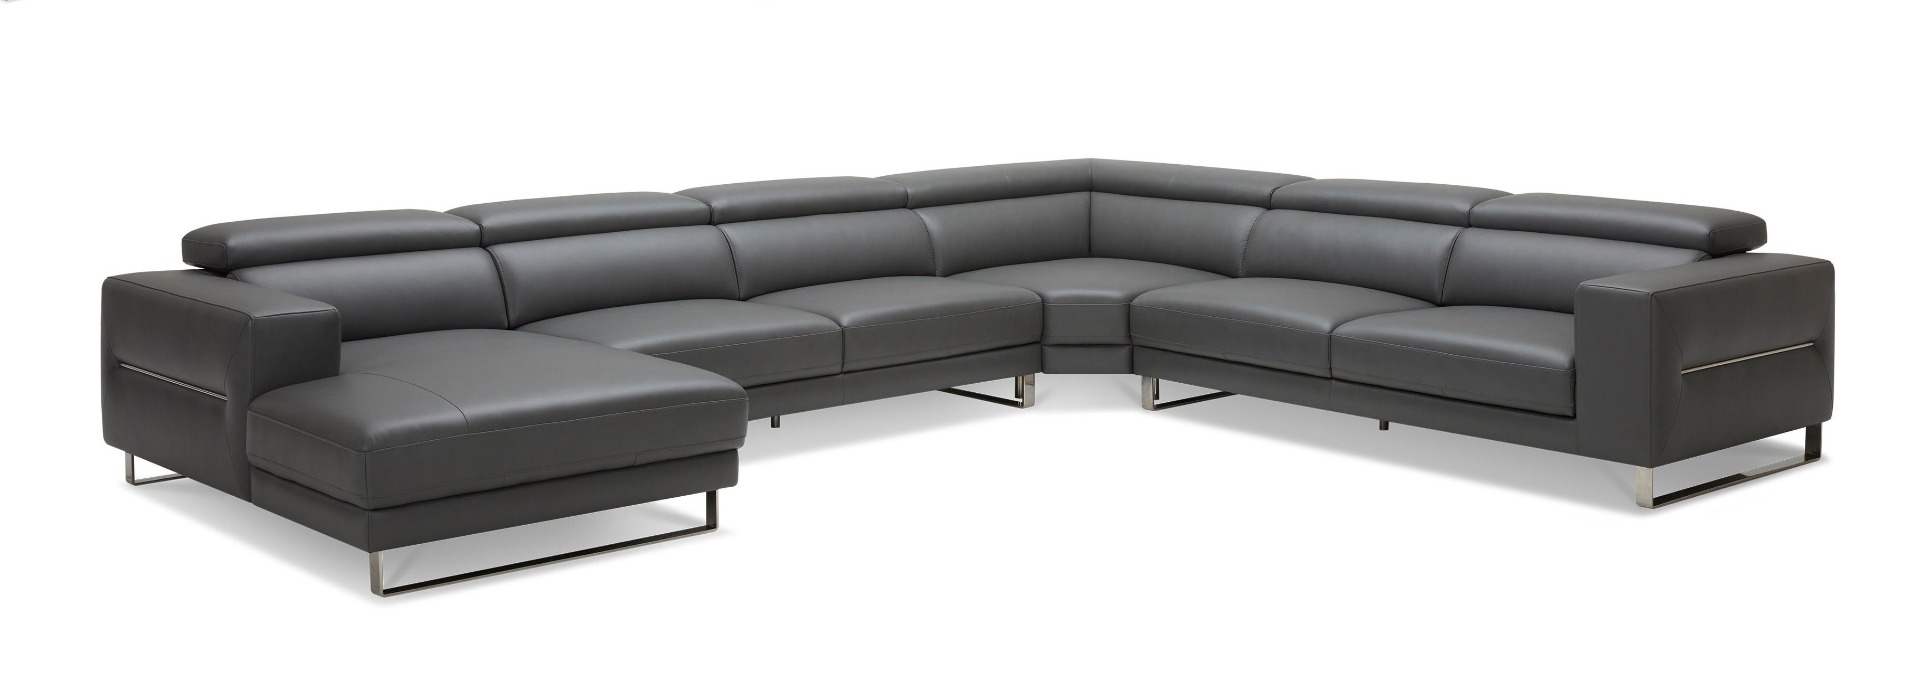 Divani Casa Hawkey – Contemporary Black Leather LAF Chaise Sectional Sofa